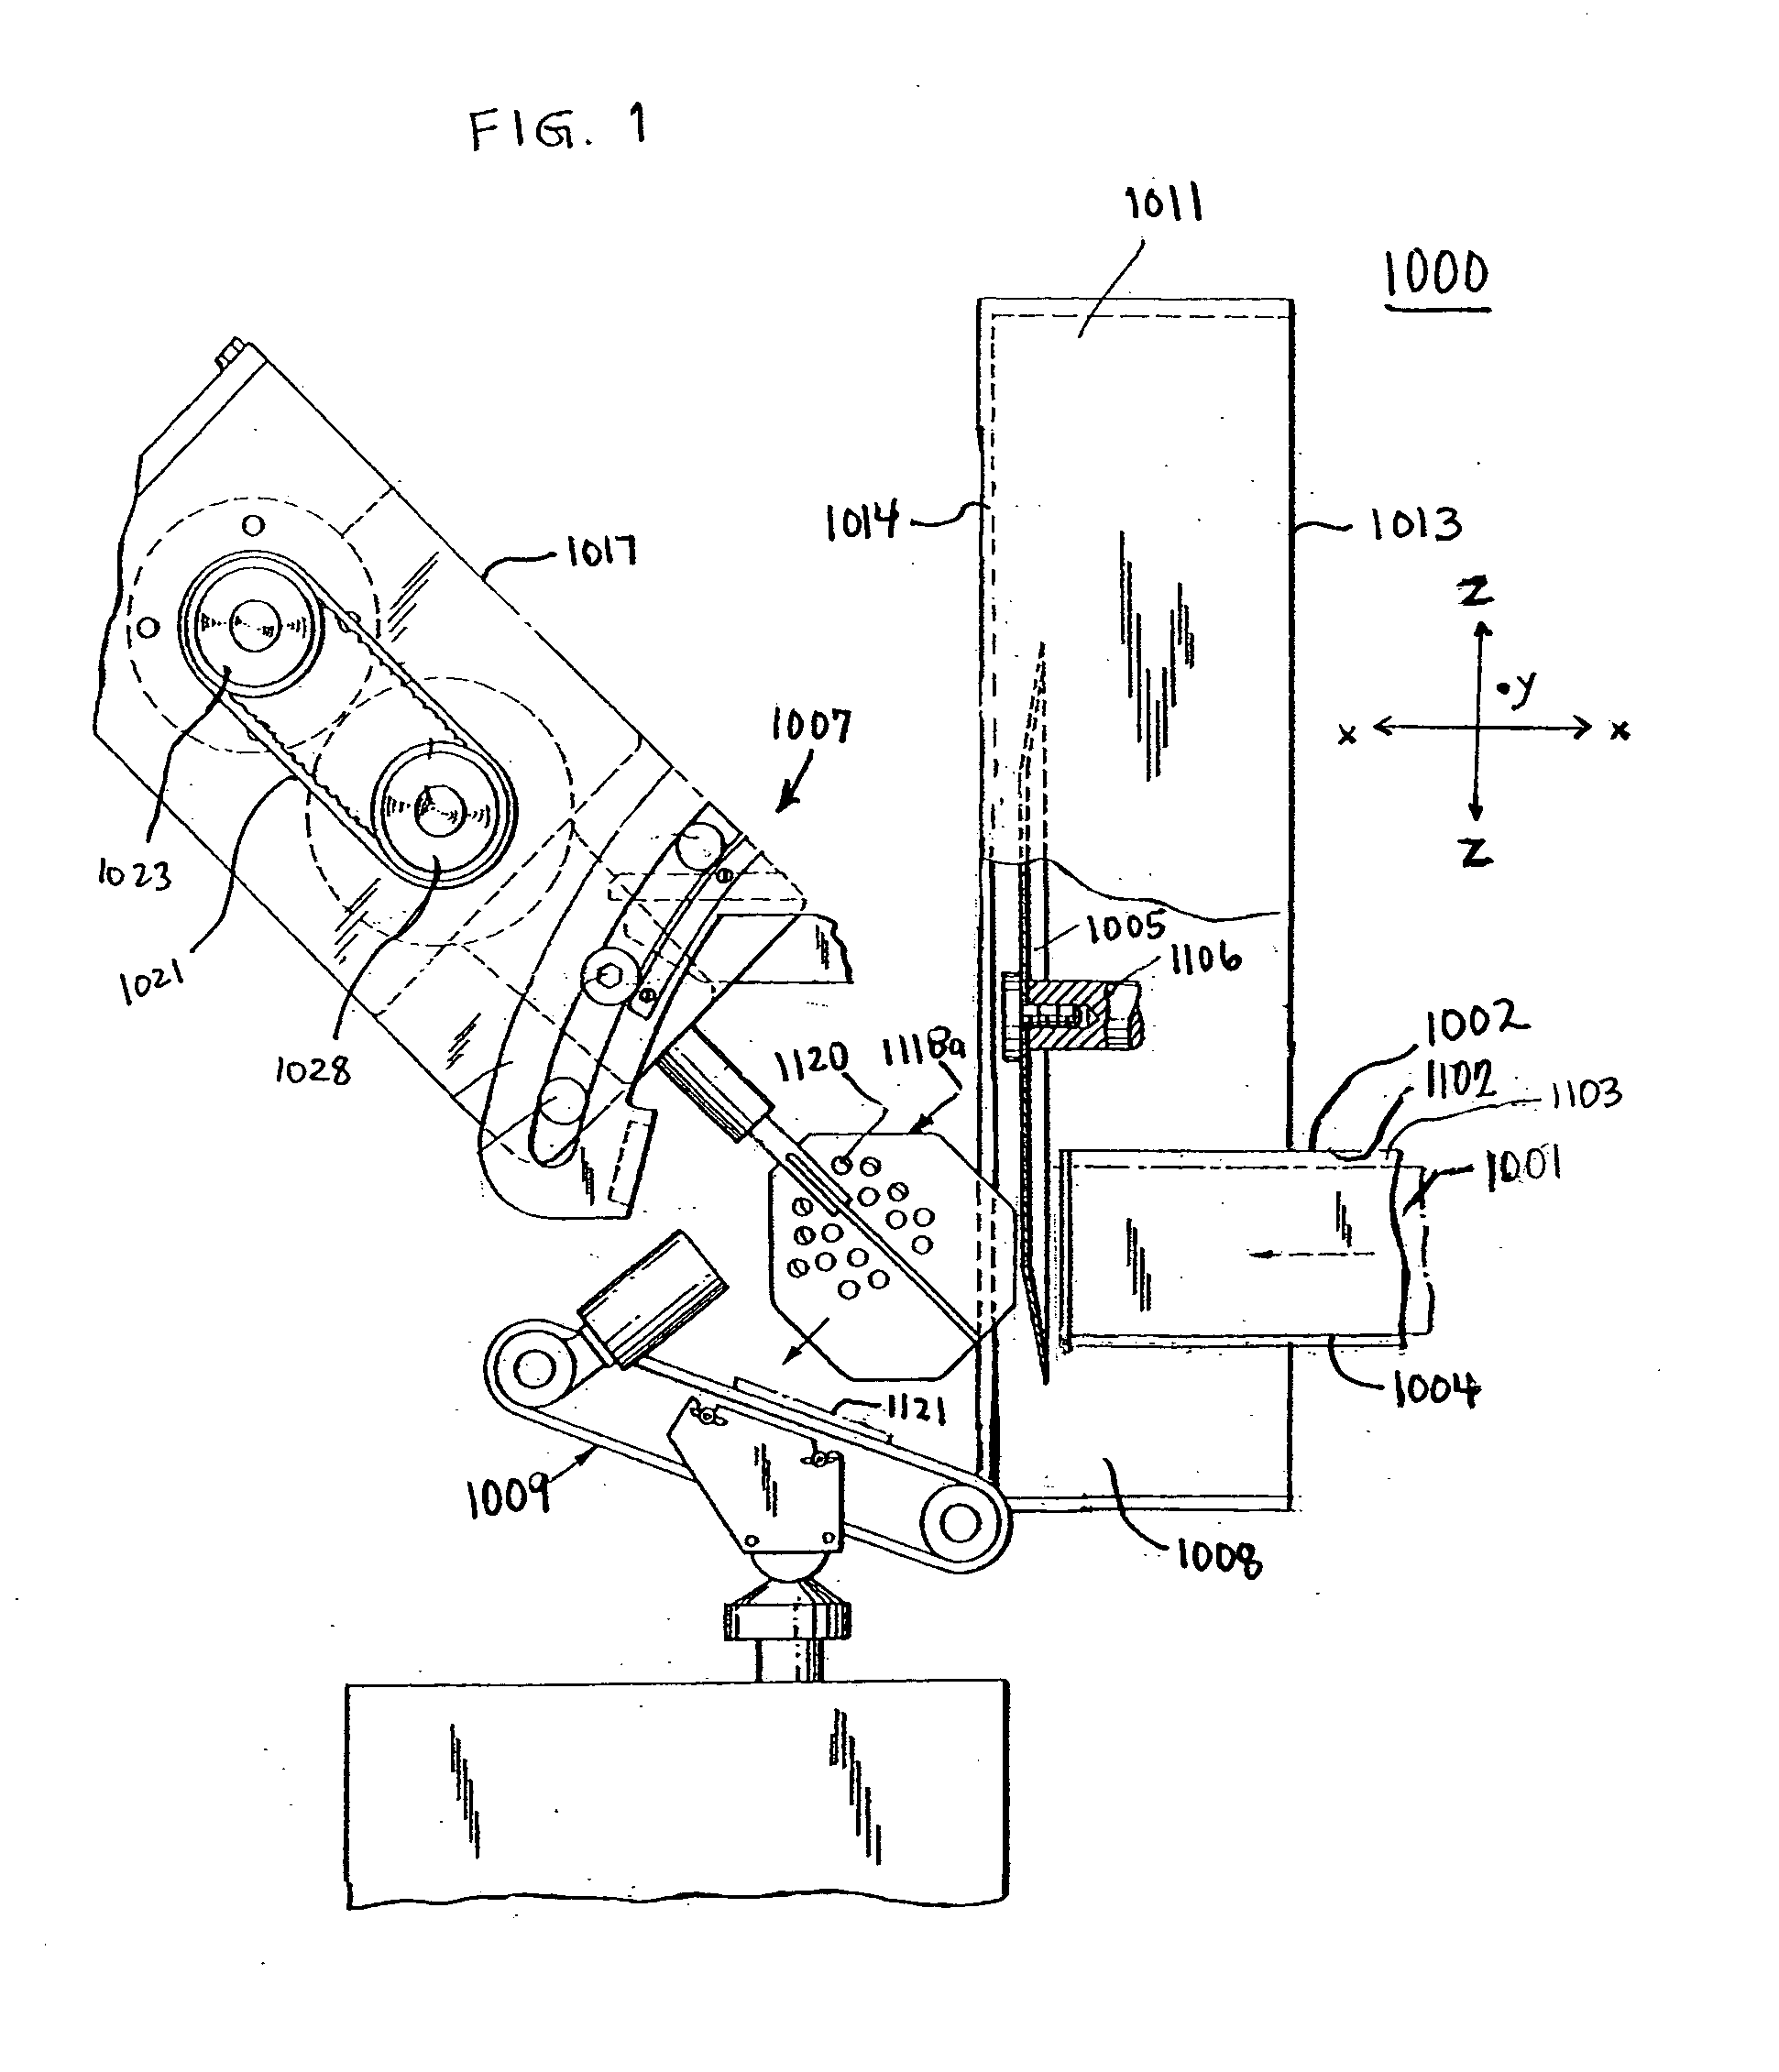 Food product slicing apparatus and method